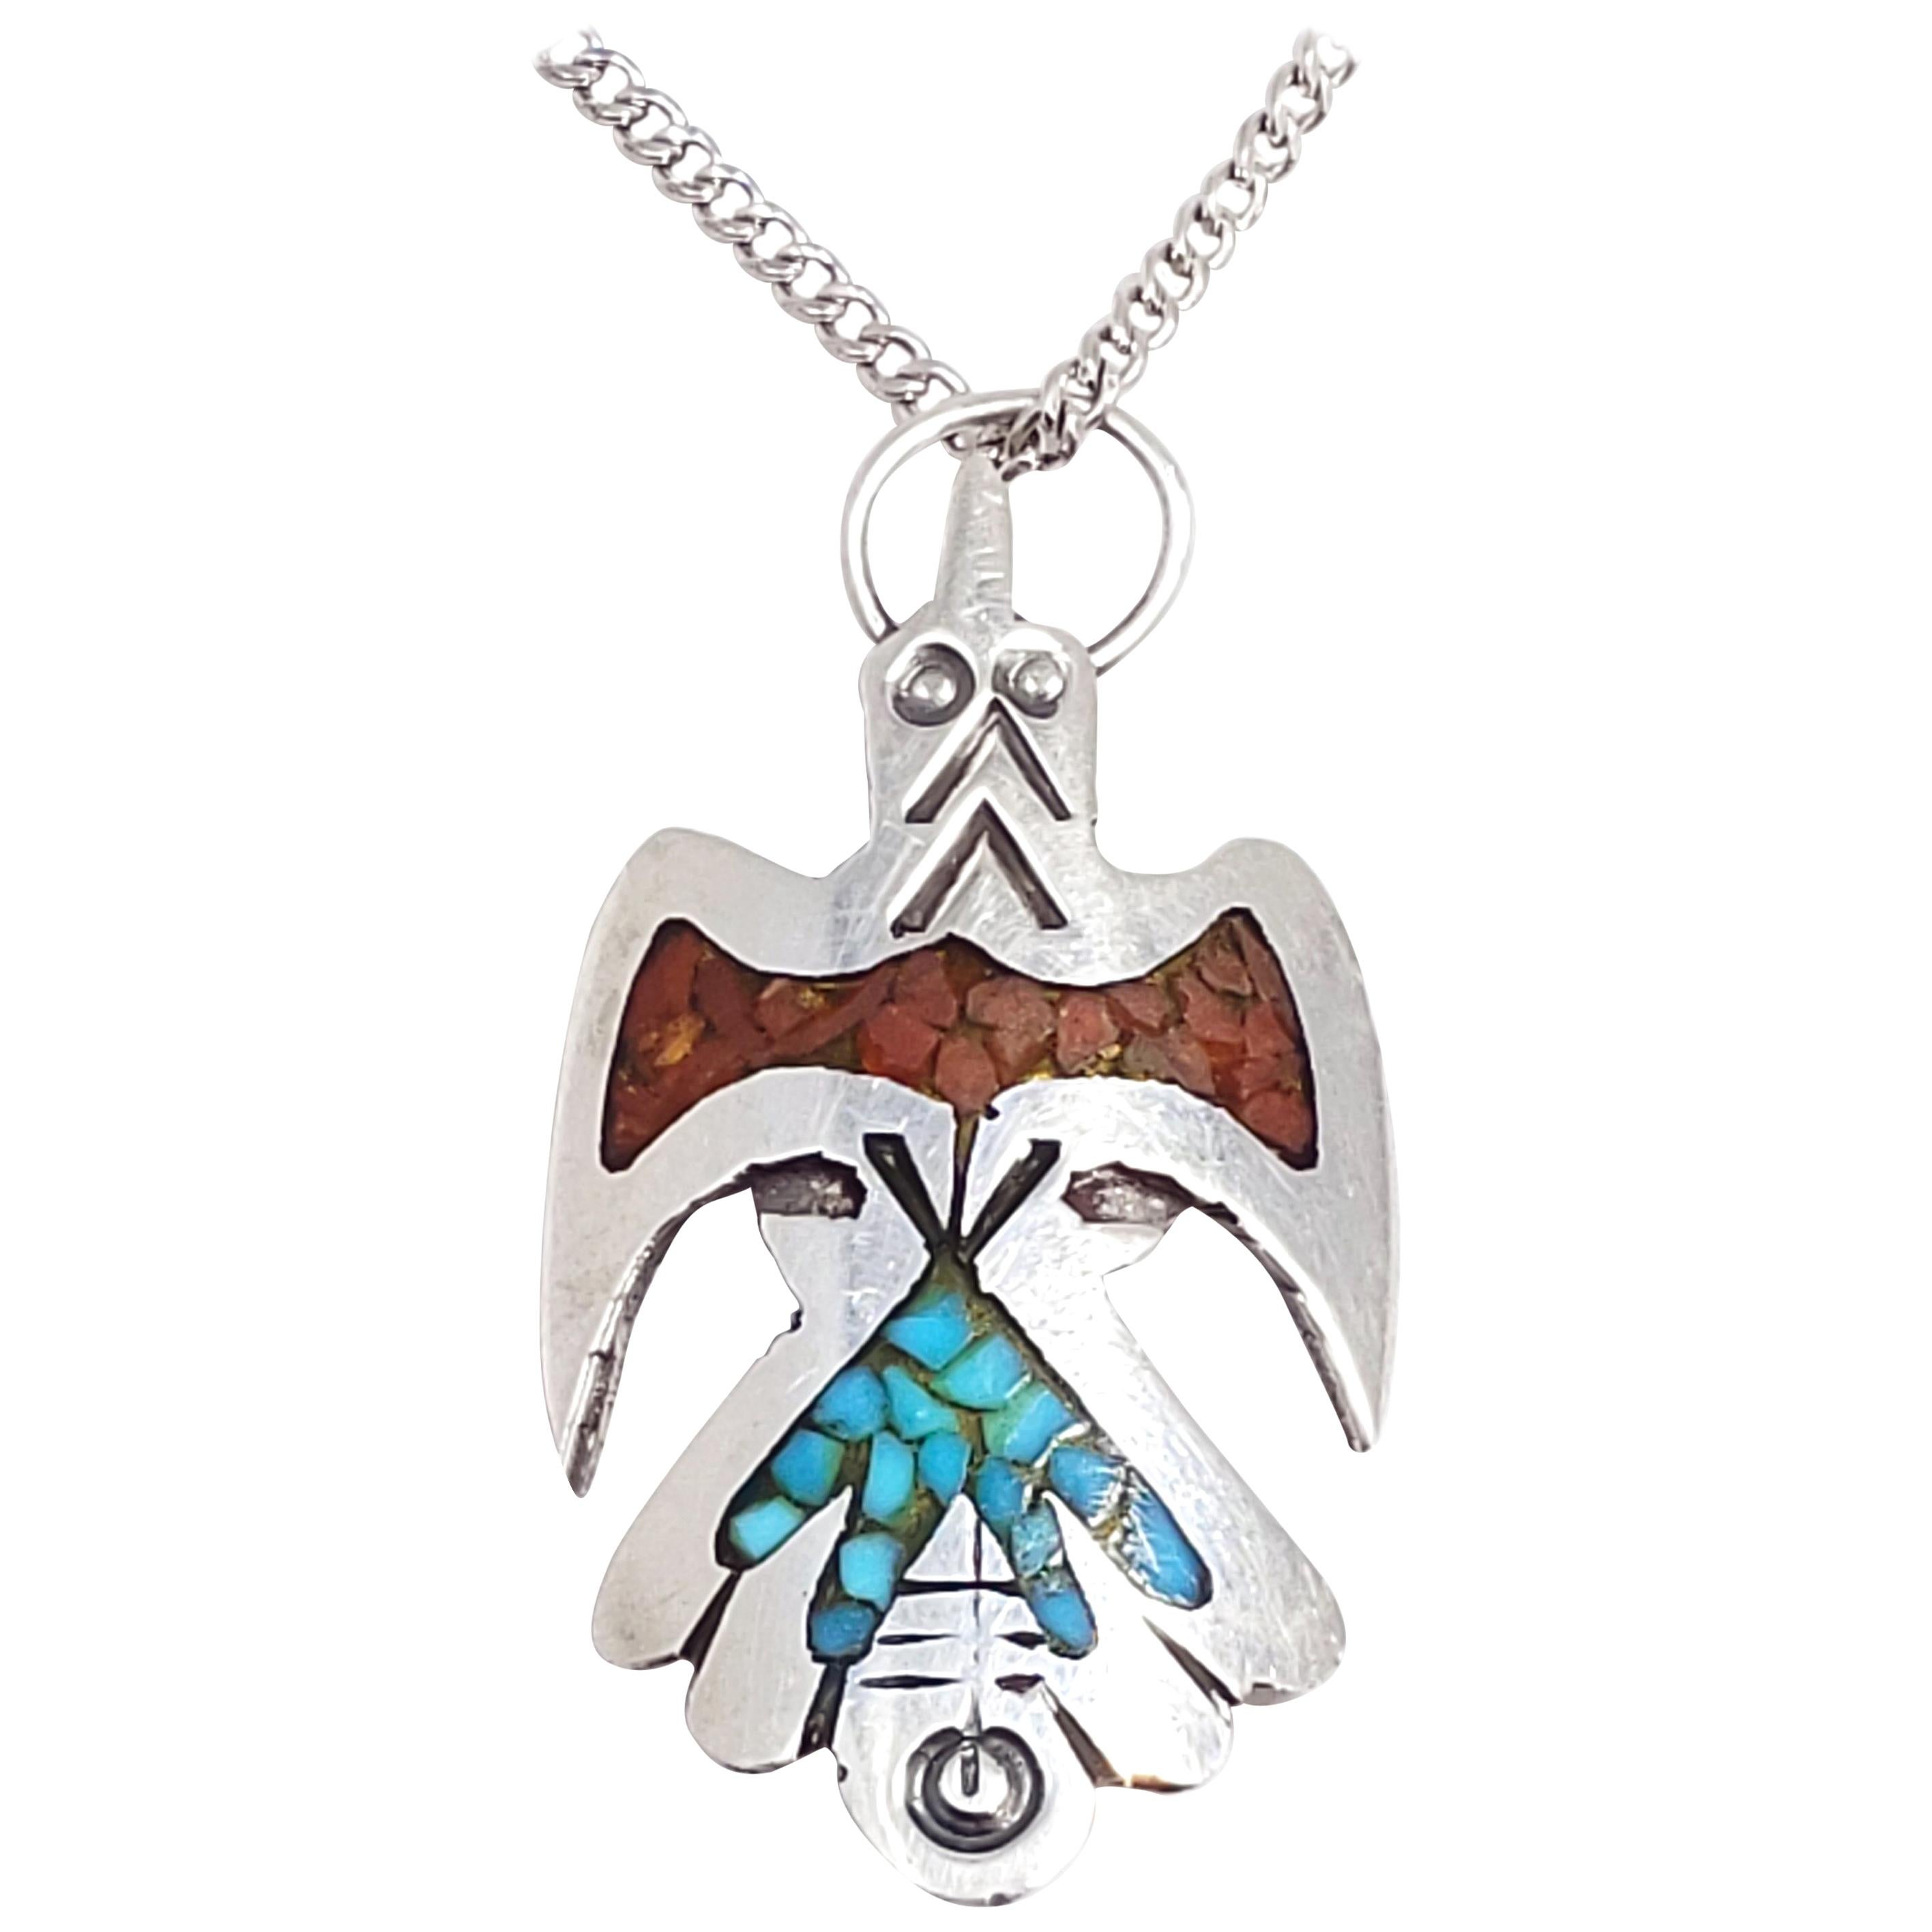 Navajo Large Teardrop Pendant Crushed Turquoise Coral Inlay Sterling Silver sALe SaLe